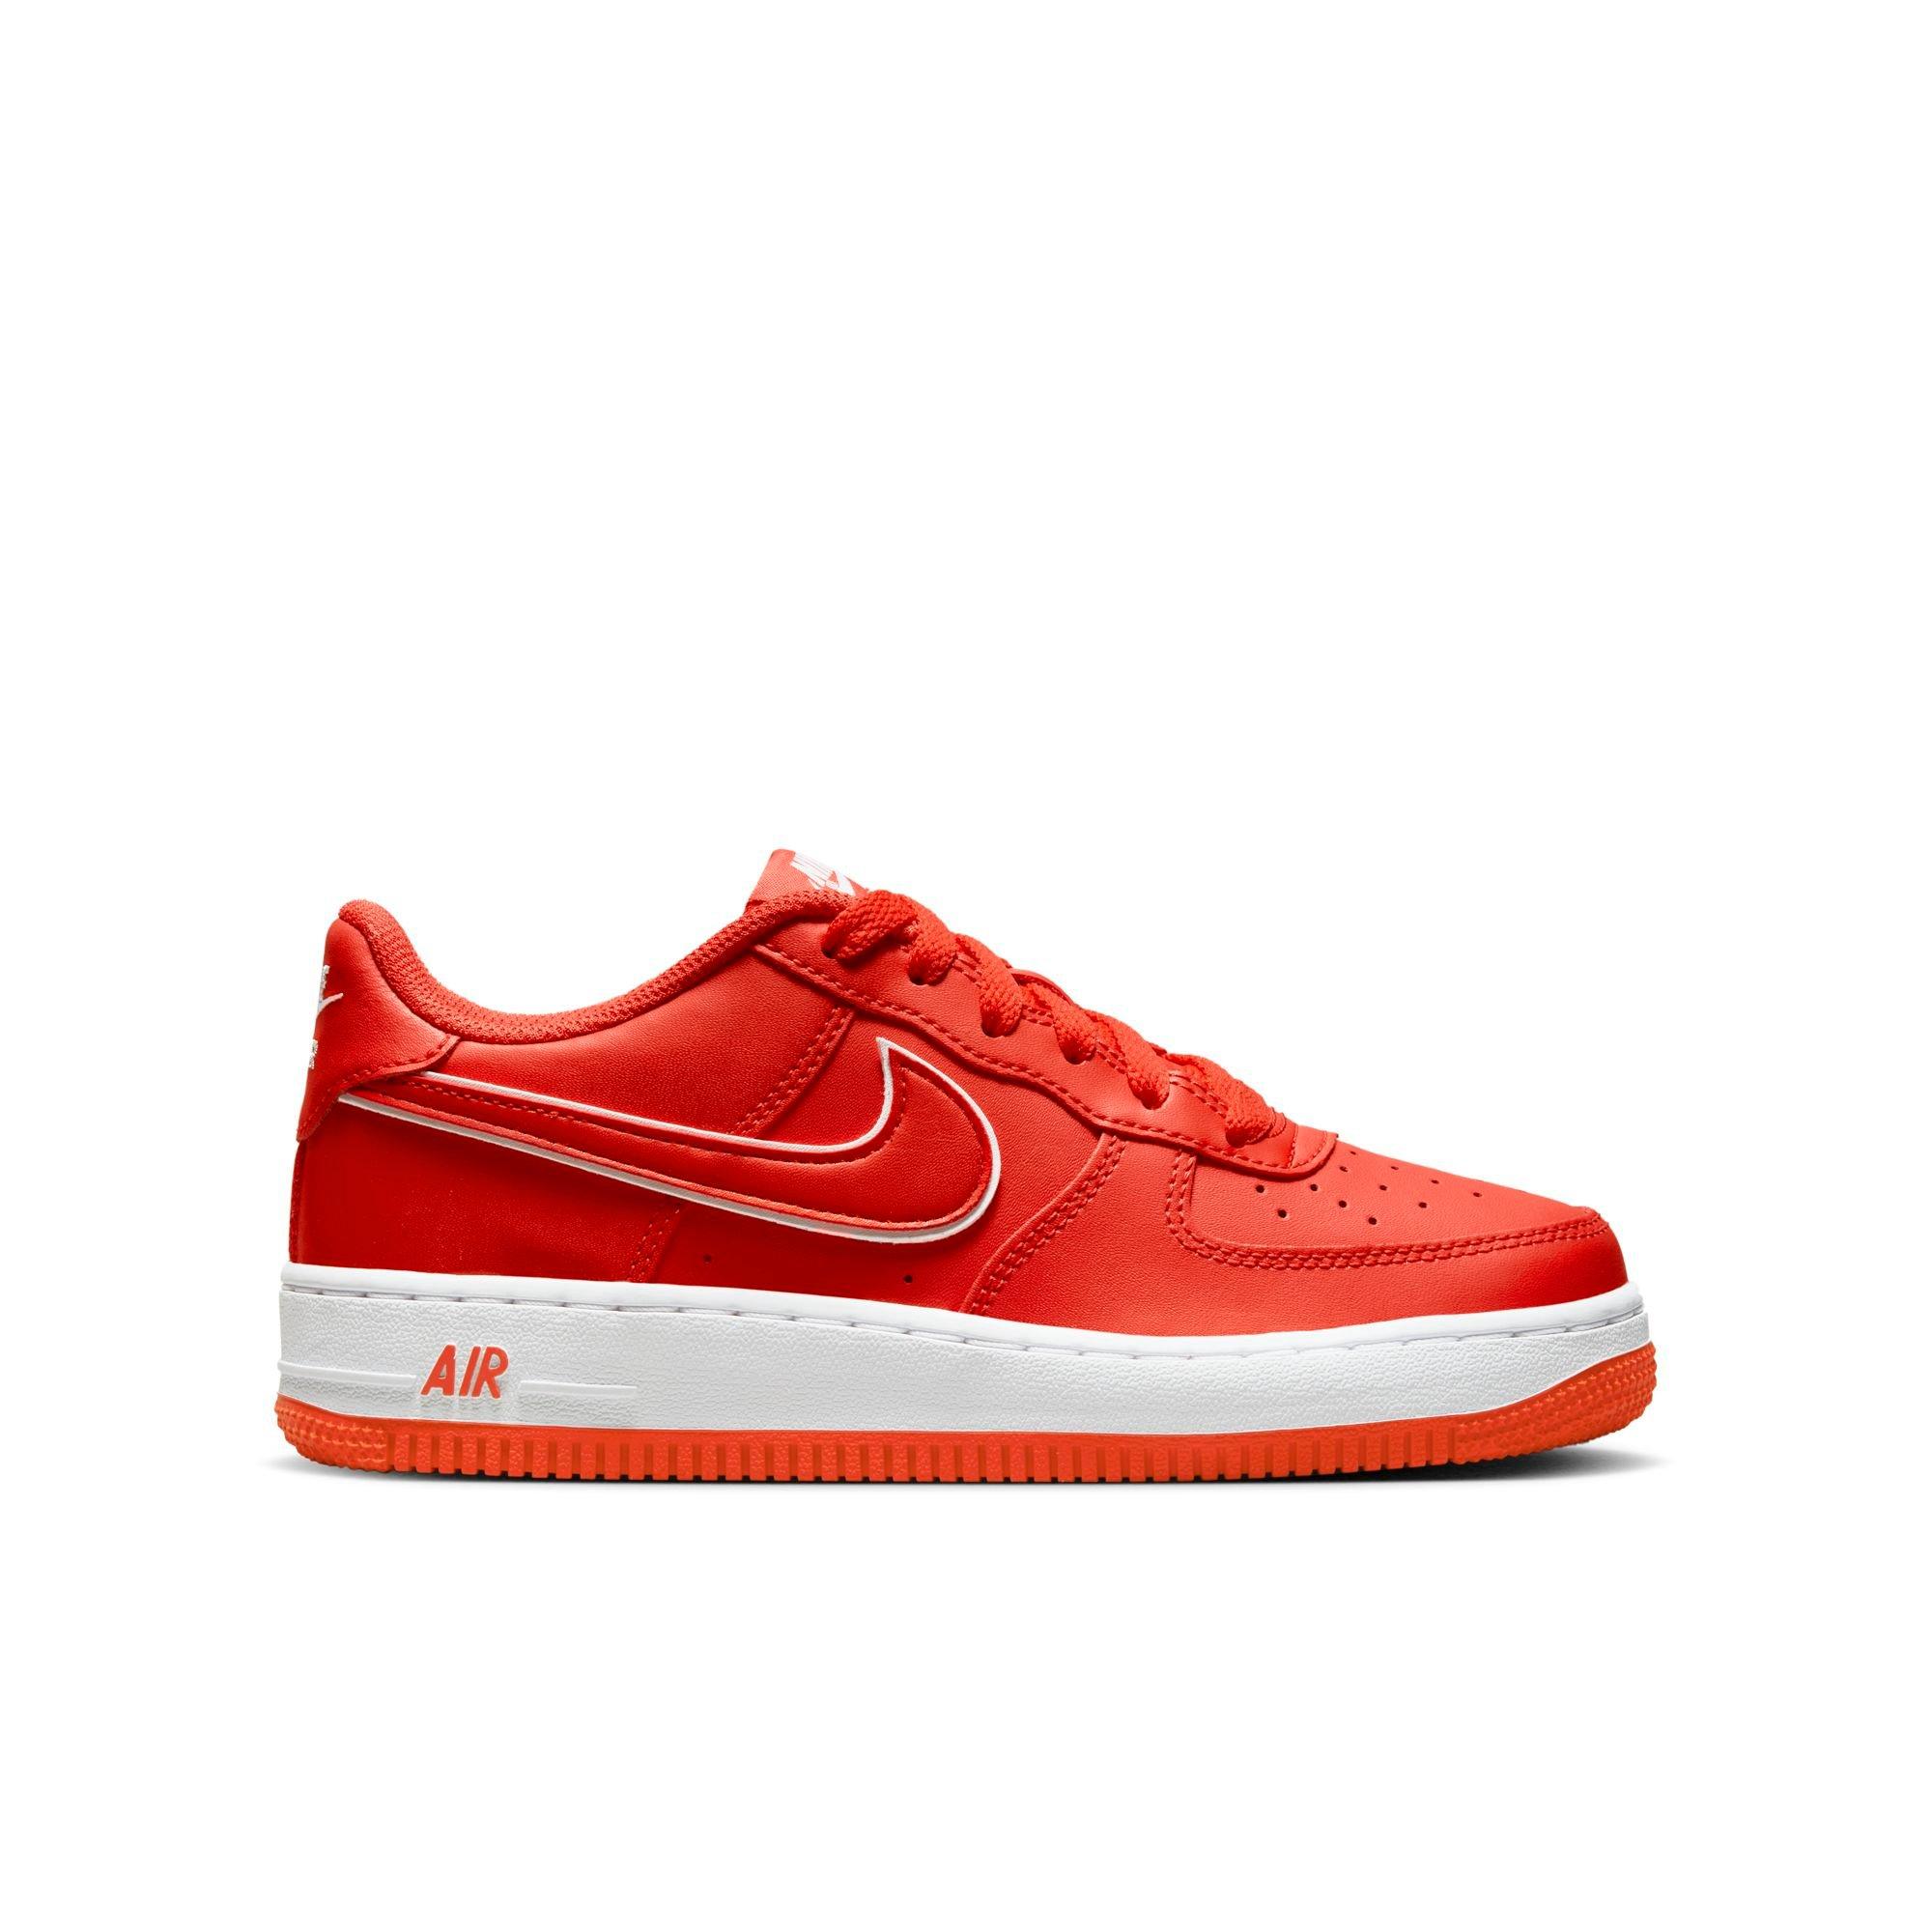 nike air force 1 low City Edition NBA 07 lv8 Red Shoes For Men, Size 10.5